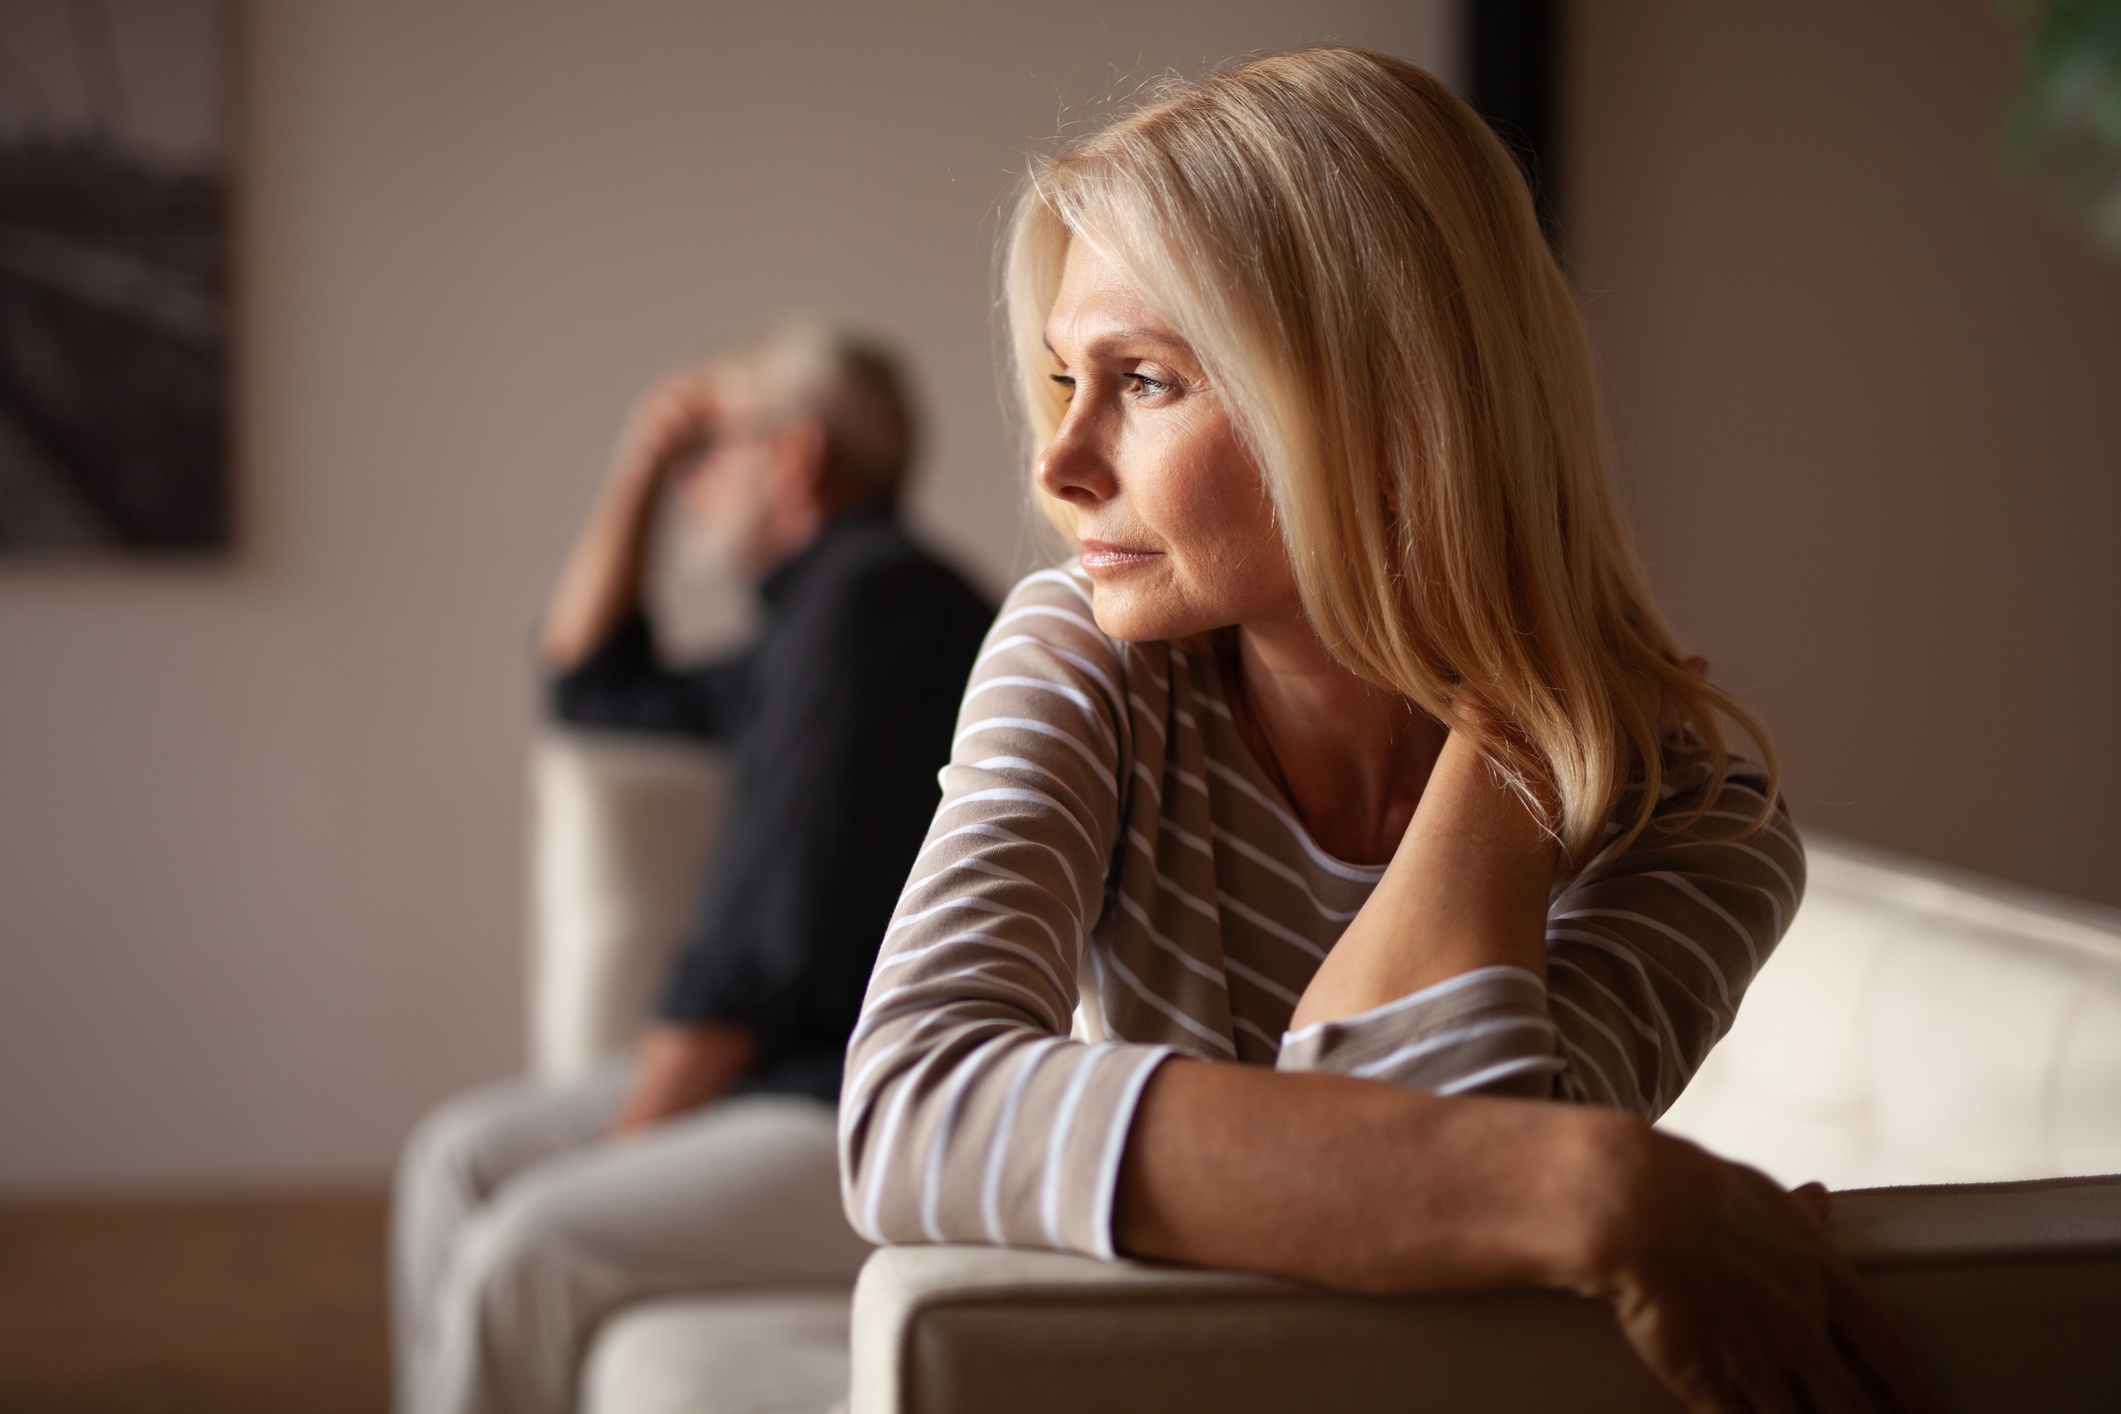 A woman looking thoughtful in the foreground, with a man sitting in the background out of focus, both appearing contemplative